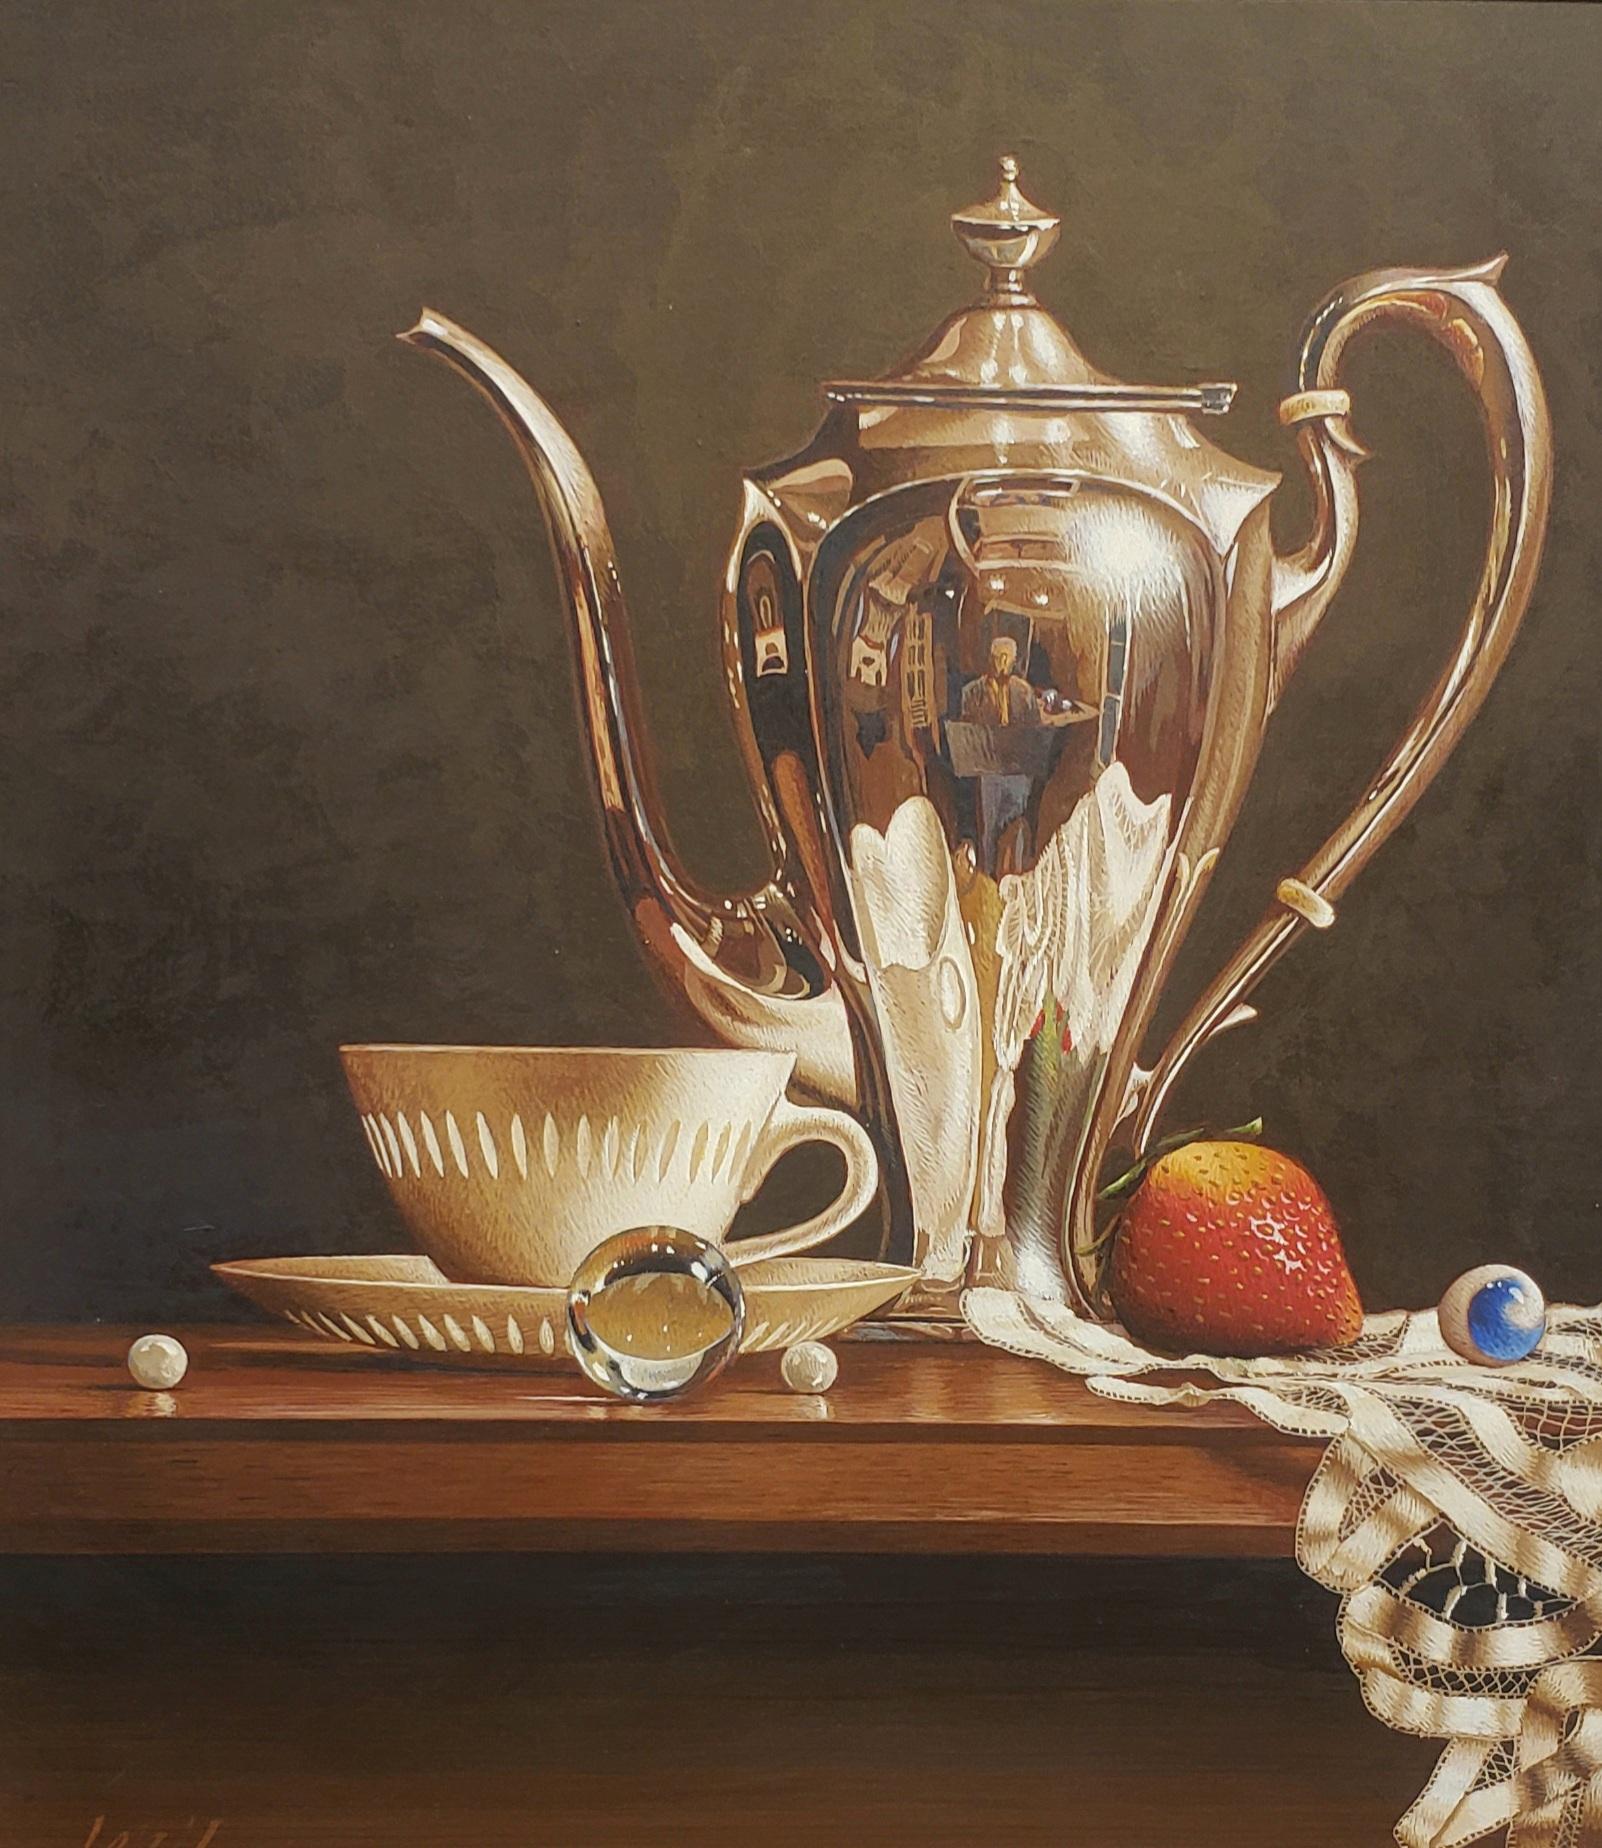   Coffee Cup w/Pearl, Egg Tempera,  Realism,  3D Appearance, American Artist - Realist Painting by Mark Thompson